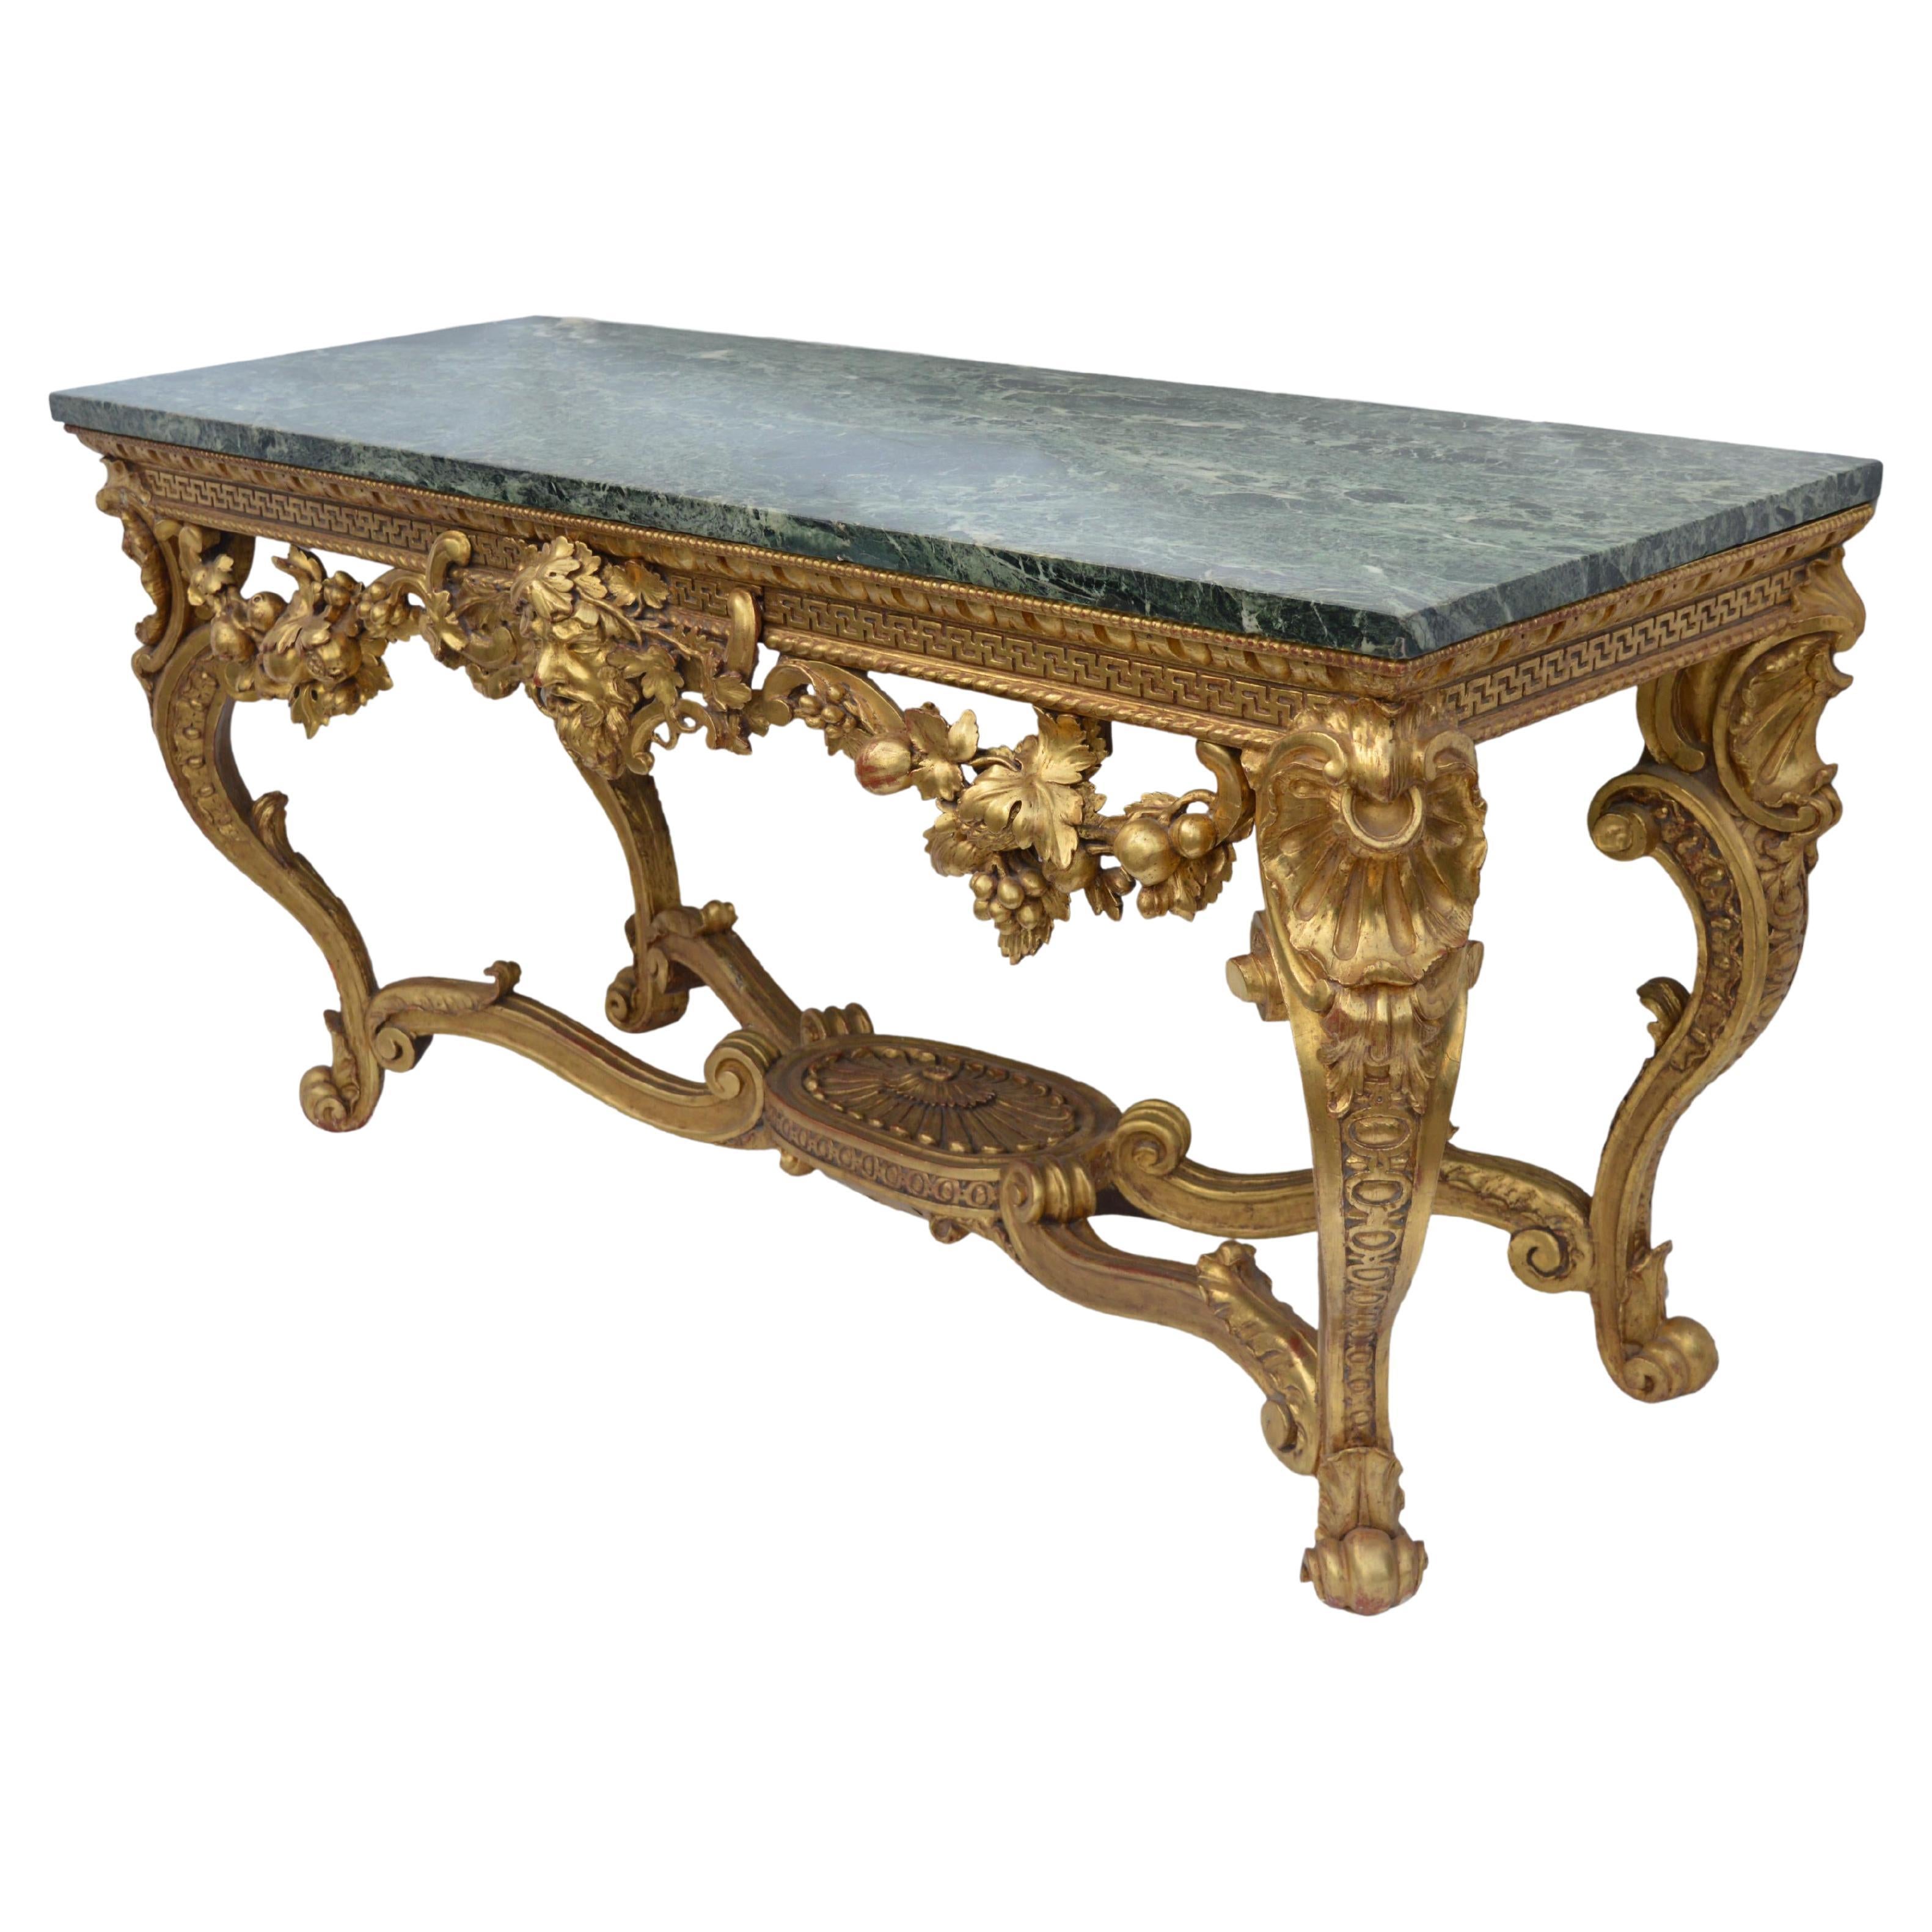 Original English, Neoclassical, Giltwood Console Table For Sale